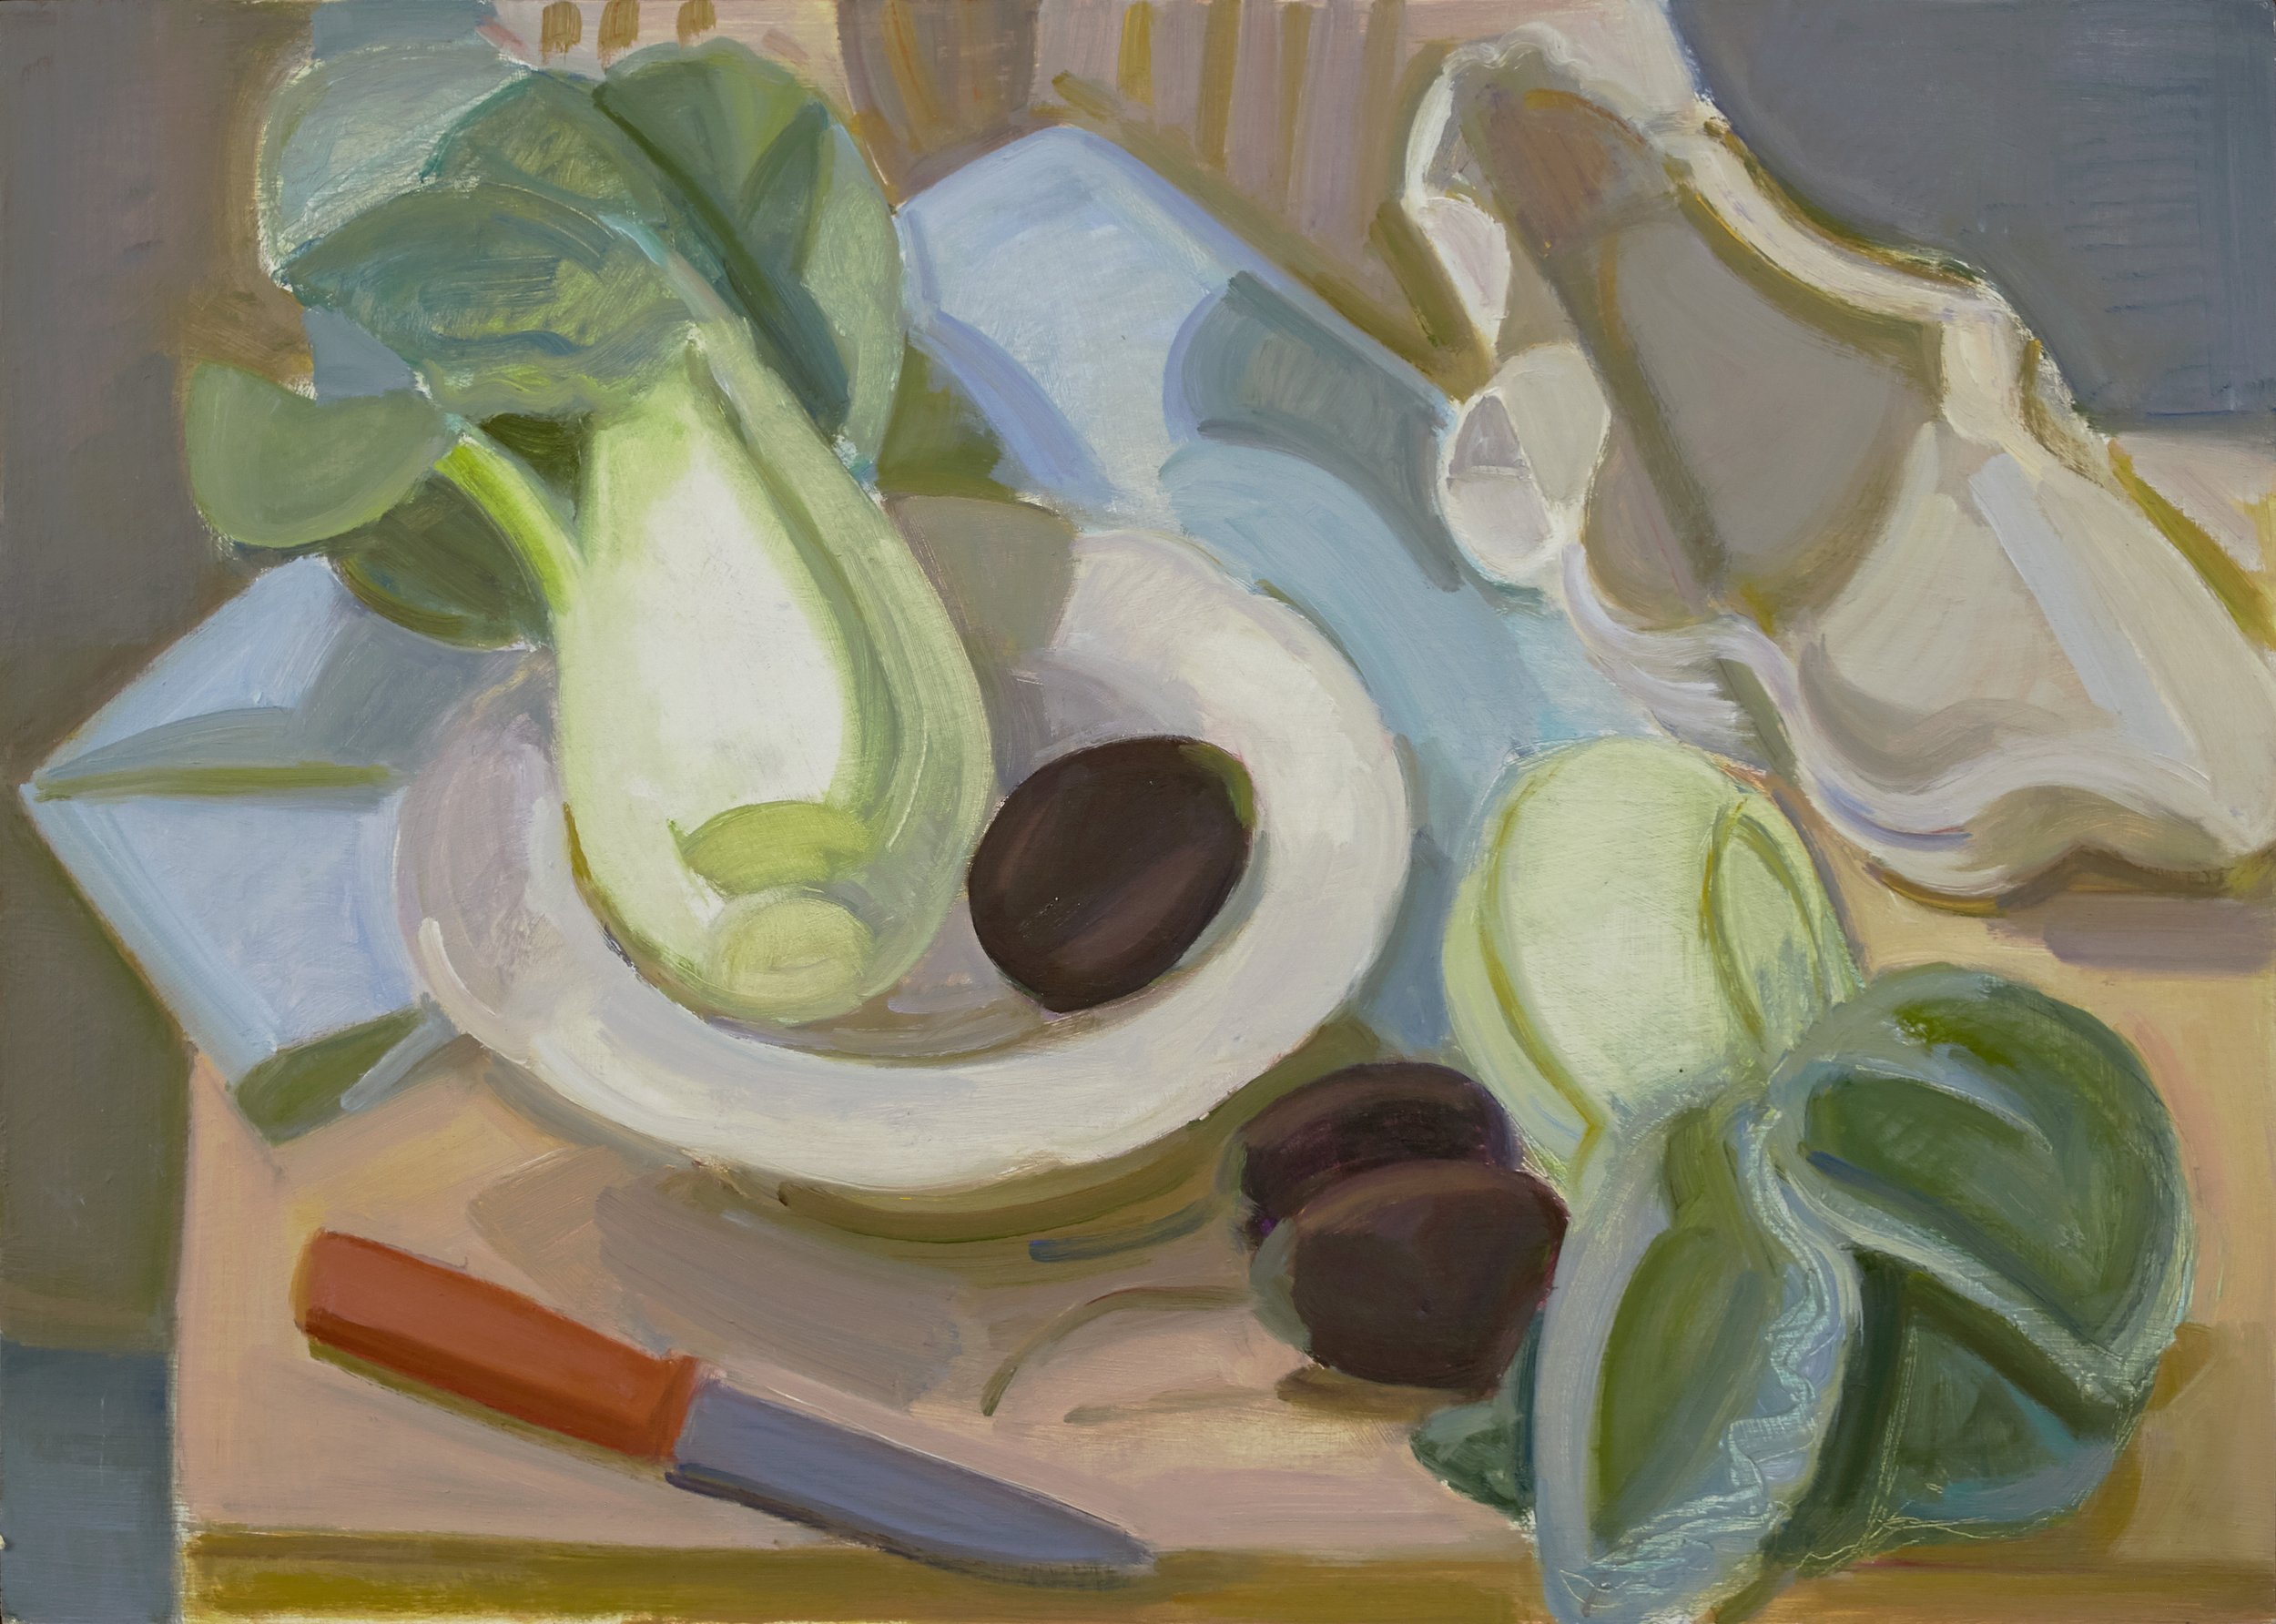   Bok Choy, Shell, Eggplants , 2012, oil/panel, 13 x 18 in. (Private collection) 